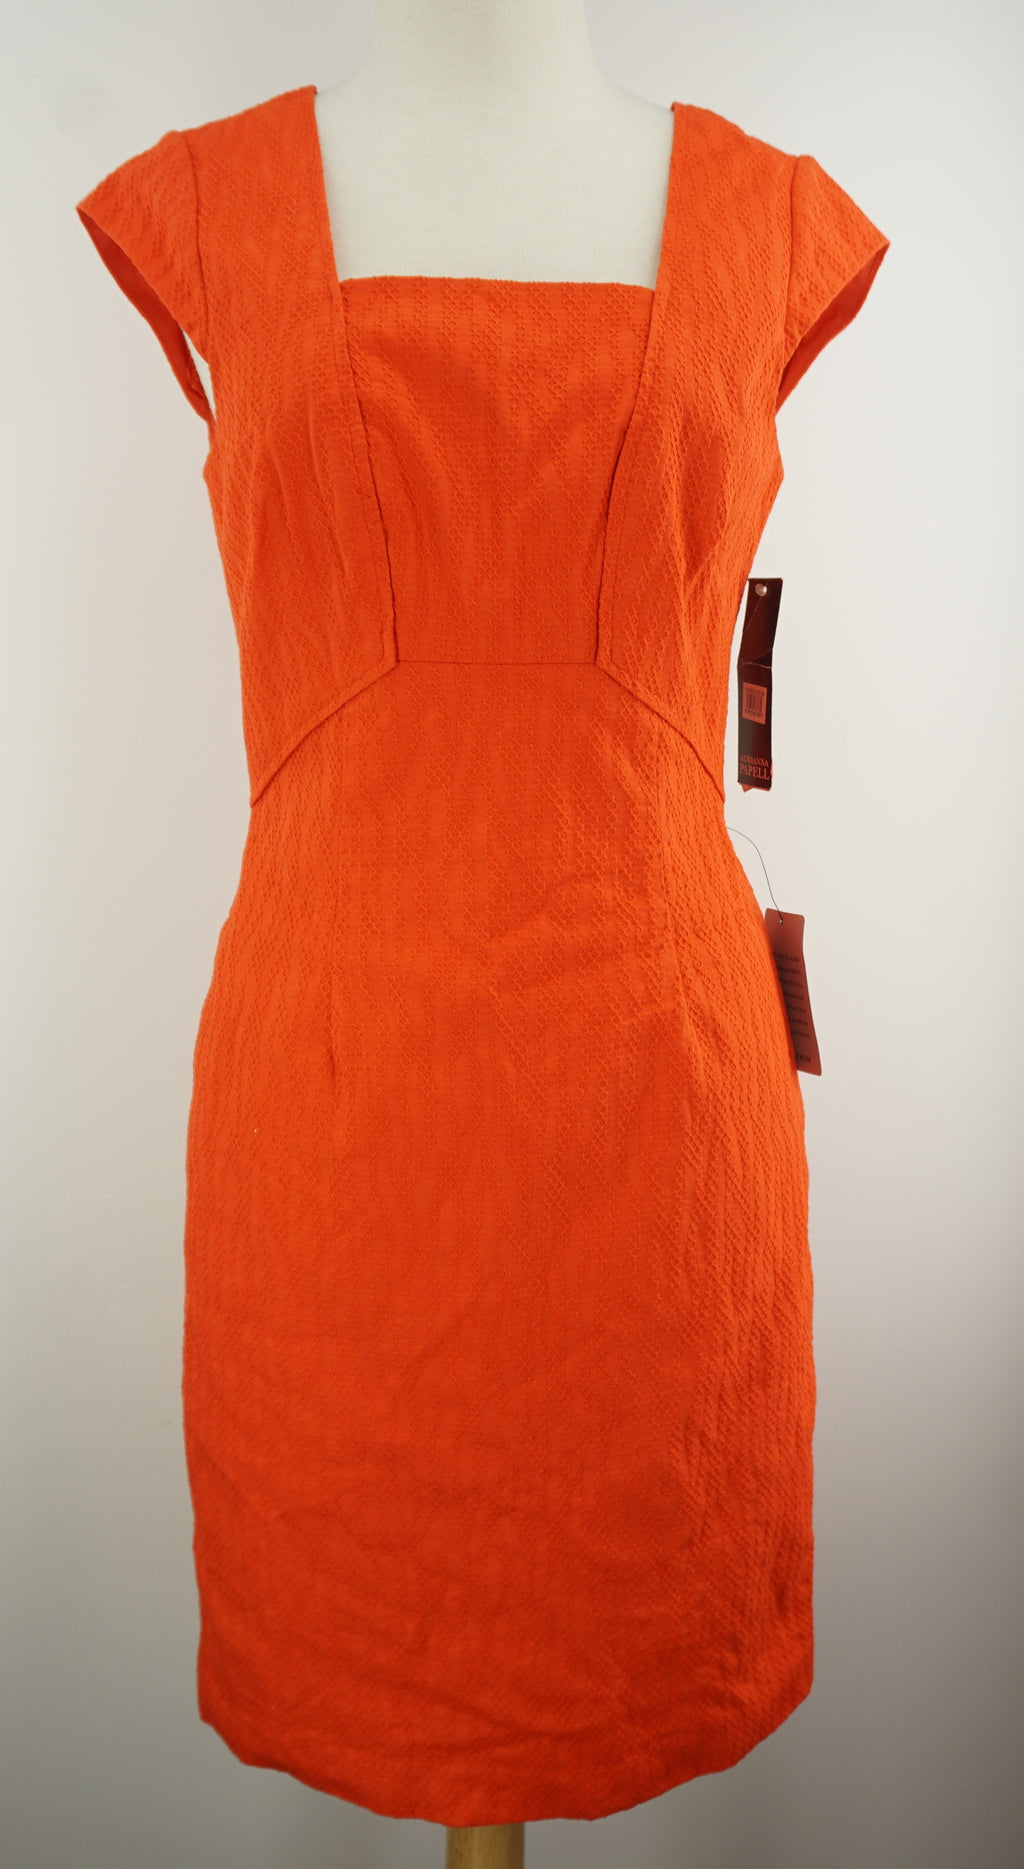 Adrianna Papell Seamed Sheath Dress Size 2 Women's $99 Cap Sleeve Coral